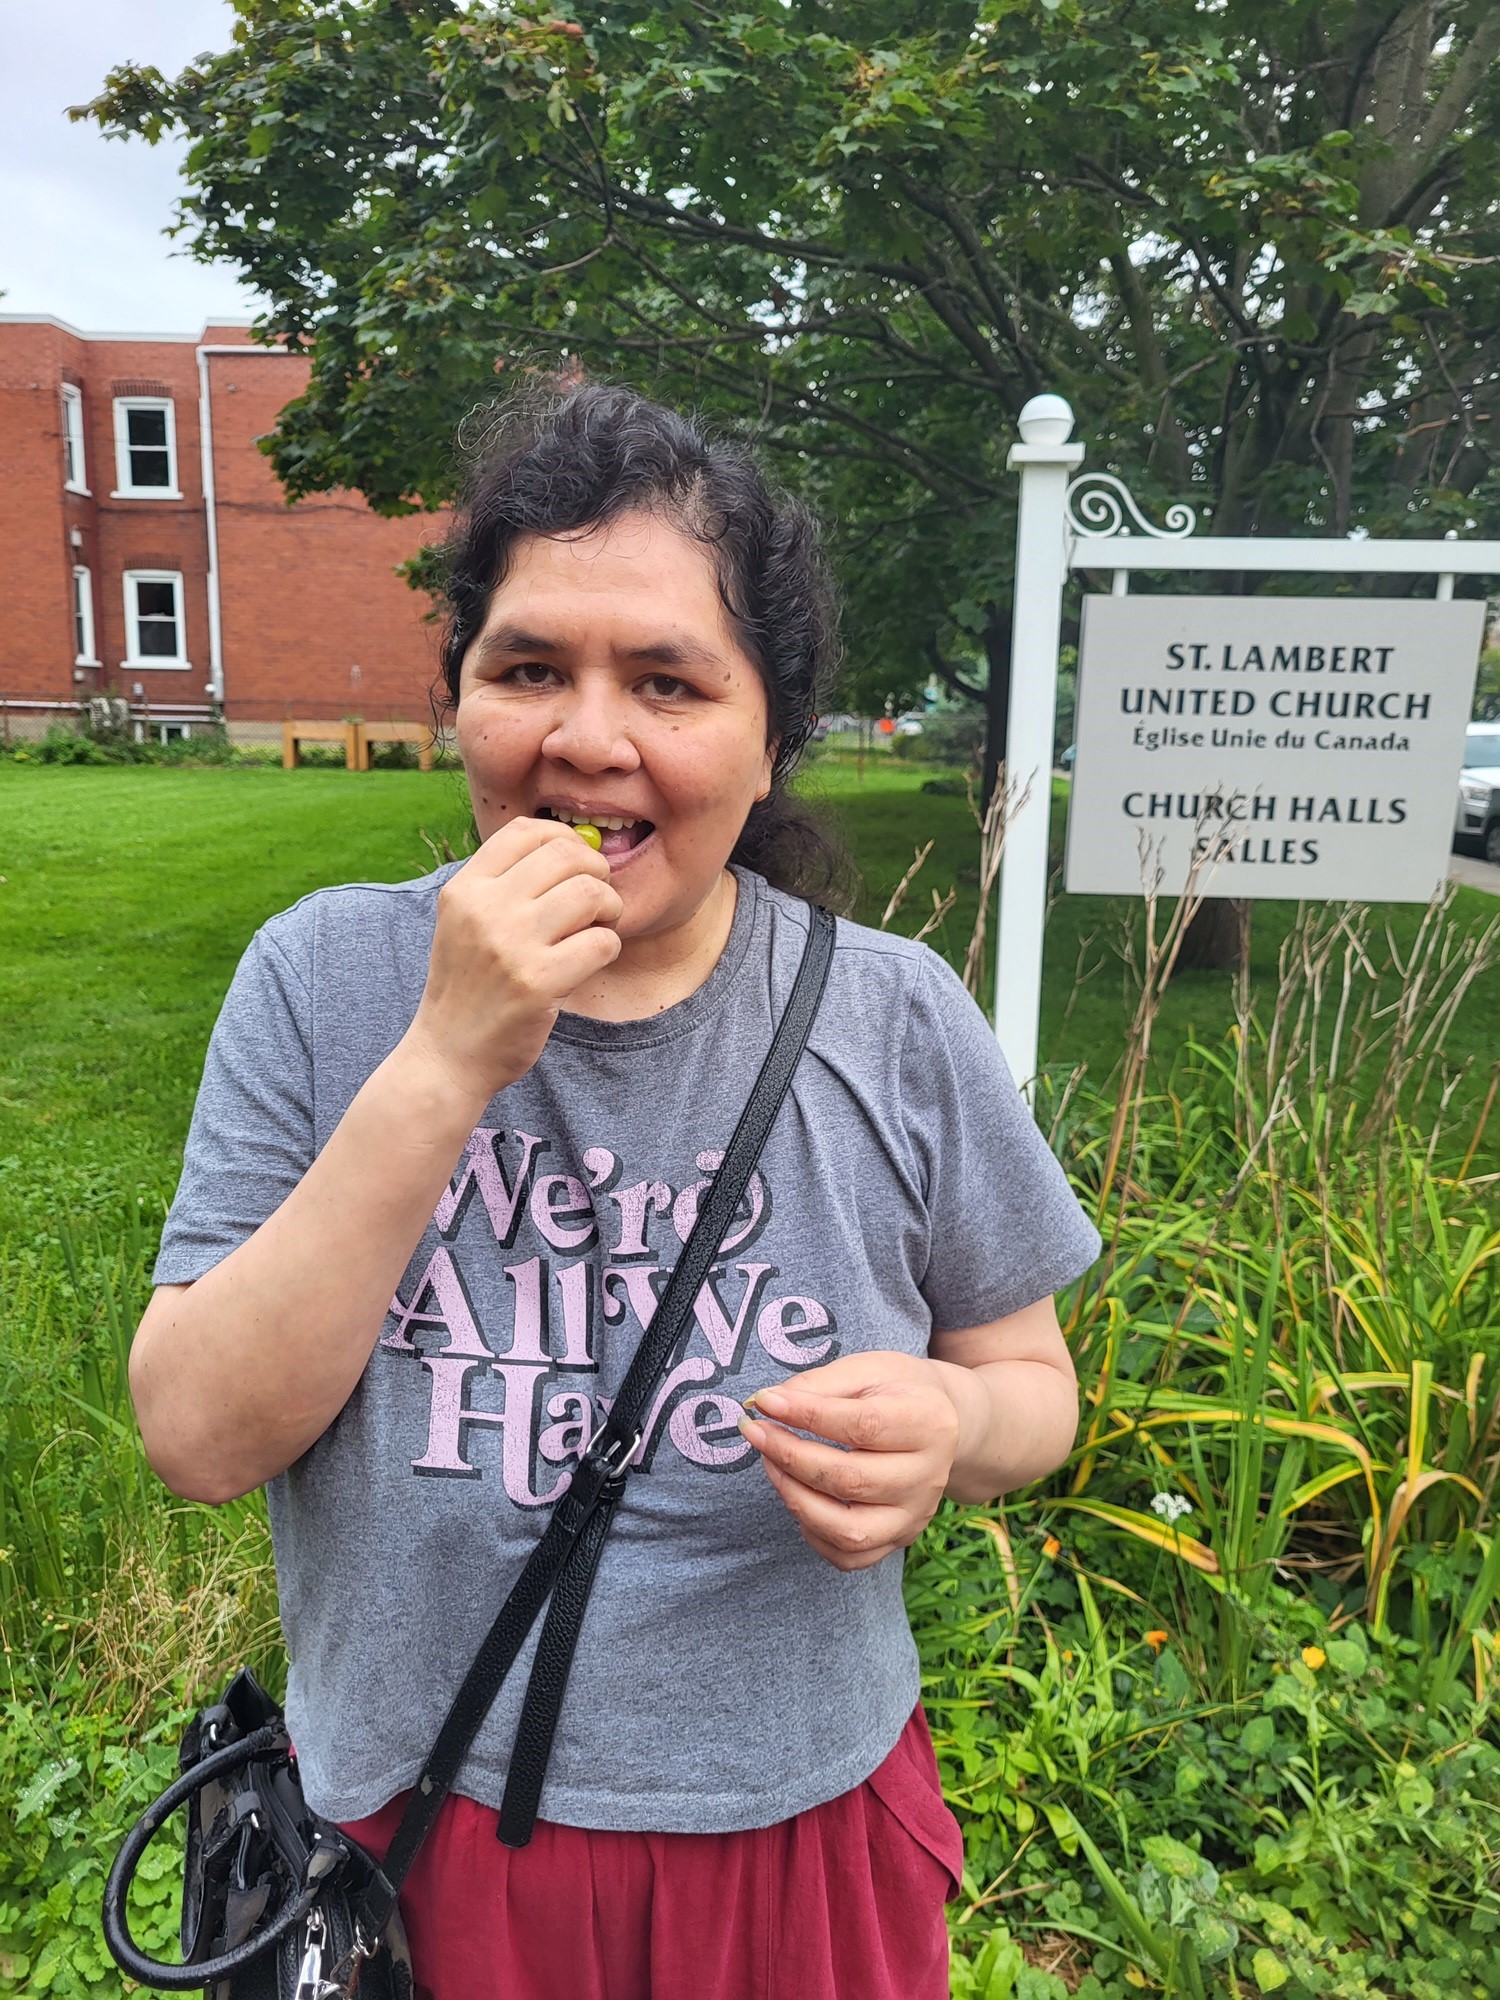 Woman tasting ground cherry in front of St. Lambert United Church sign